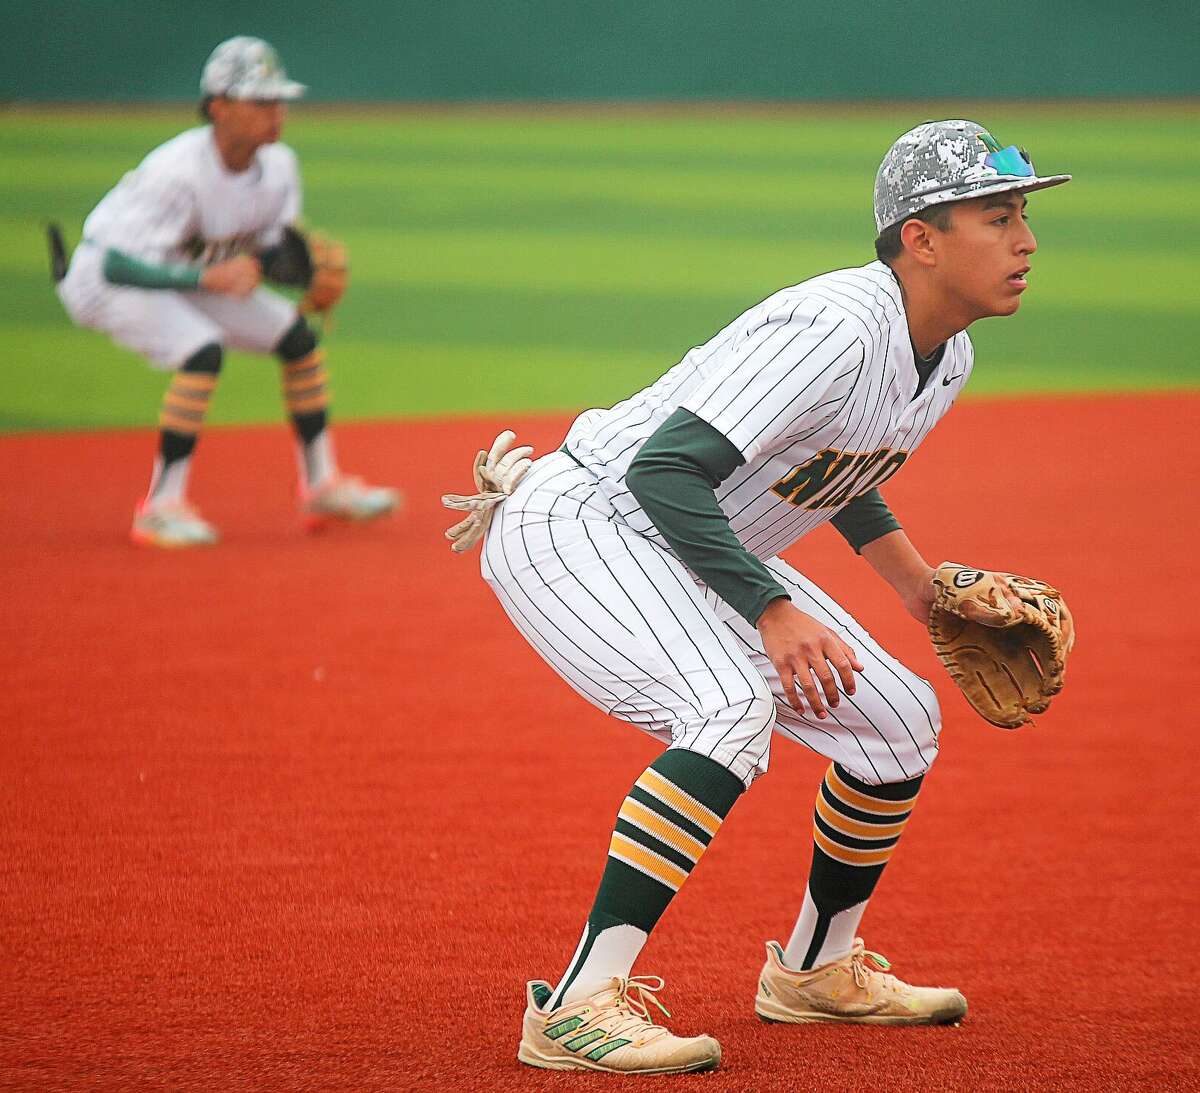 Nixon currently sits a half-game back of Del Rio for the fourth playoff spot in District 30-6A. The two teams face off Friday night at Veterans Field.